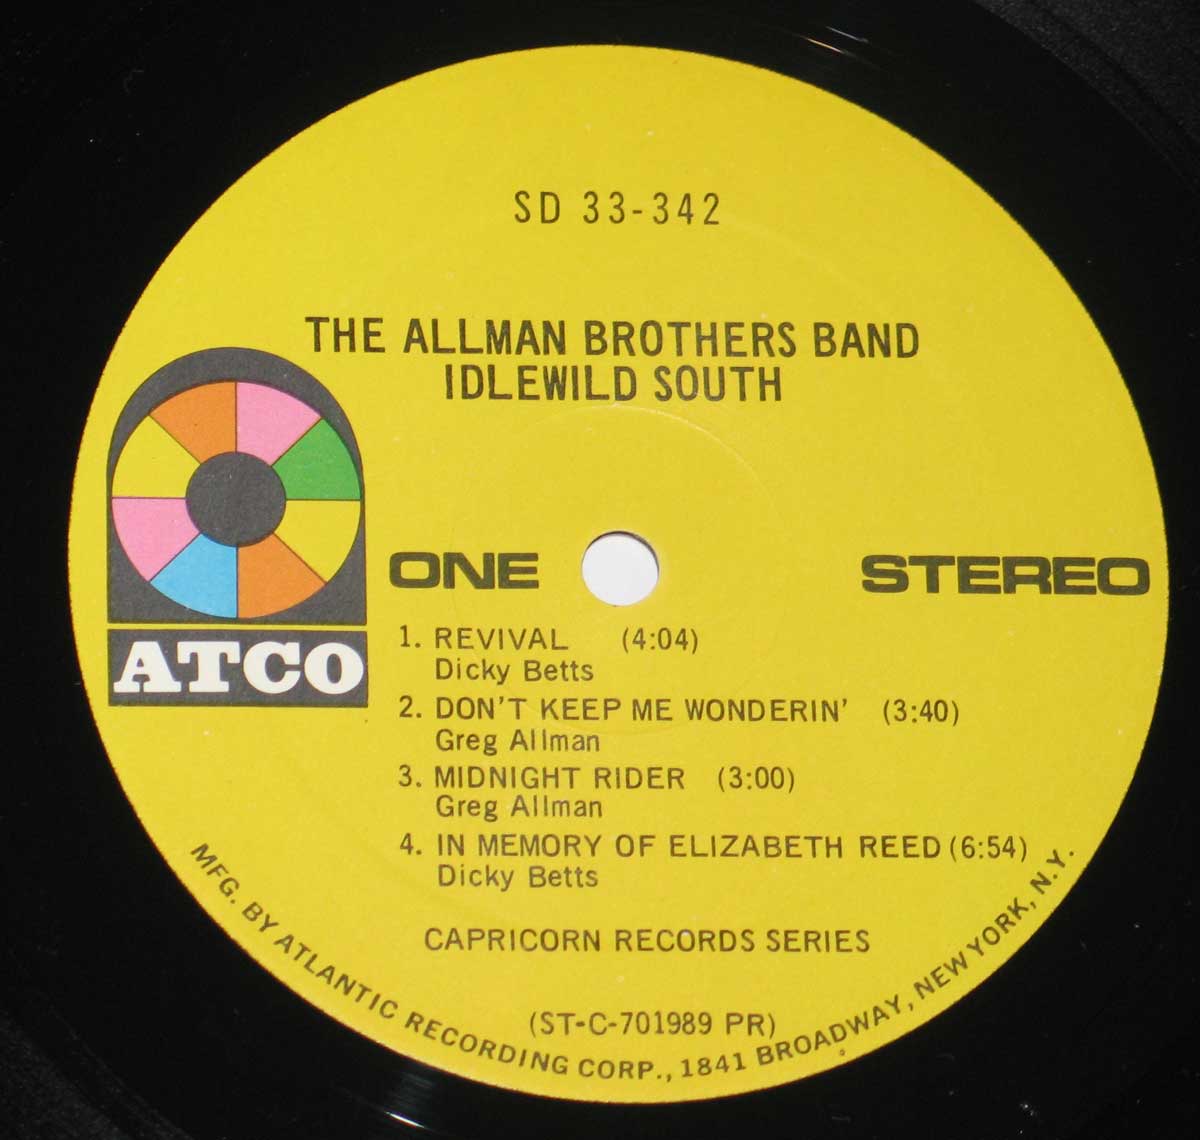 Enlarged High Resolution Photo of the Record's label Idlewild South https://vinyl-records.nl